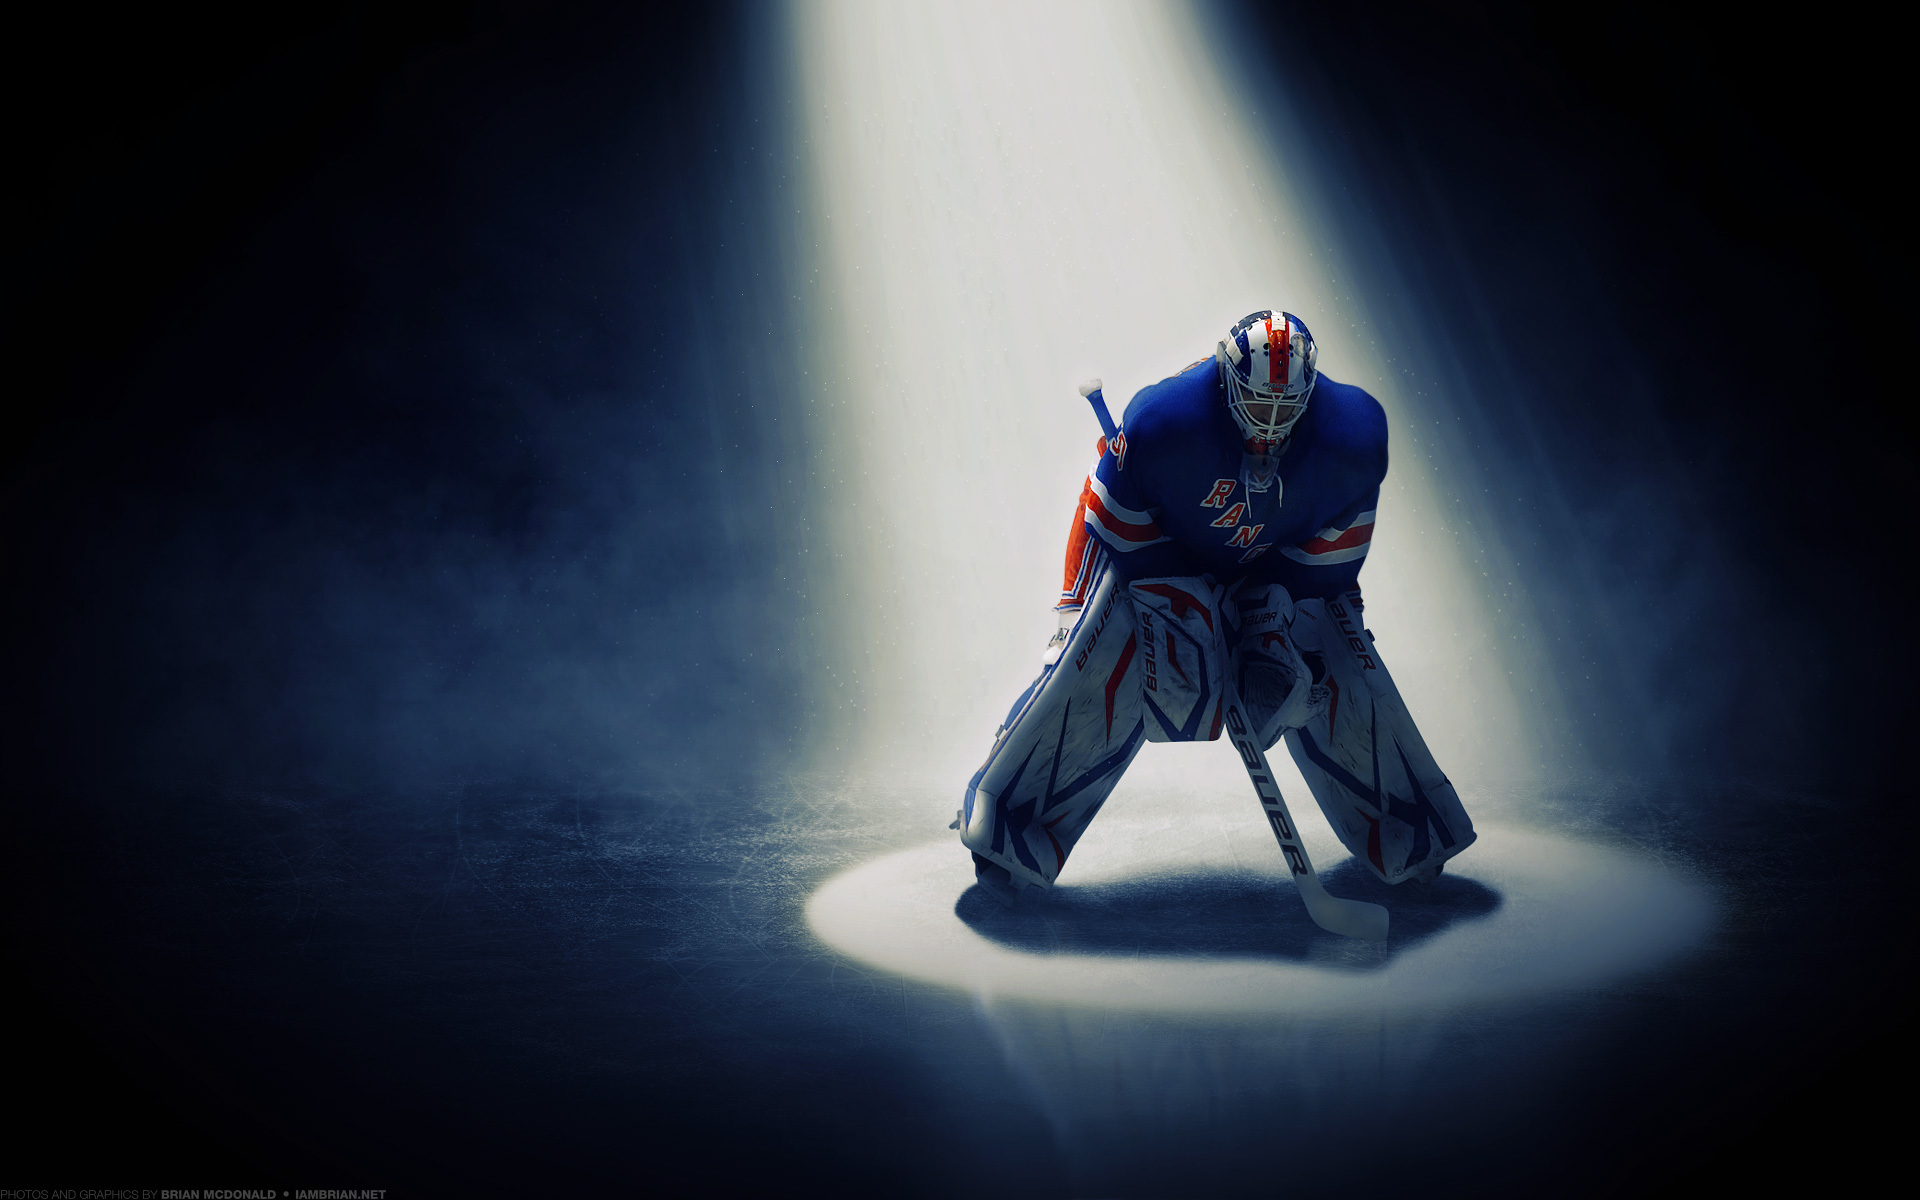  Henrik Lundqvist wallpapers and images   wallpapers pictures photos